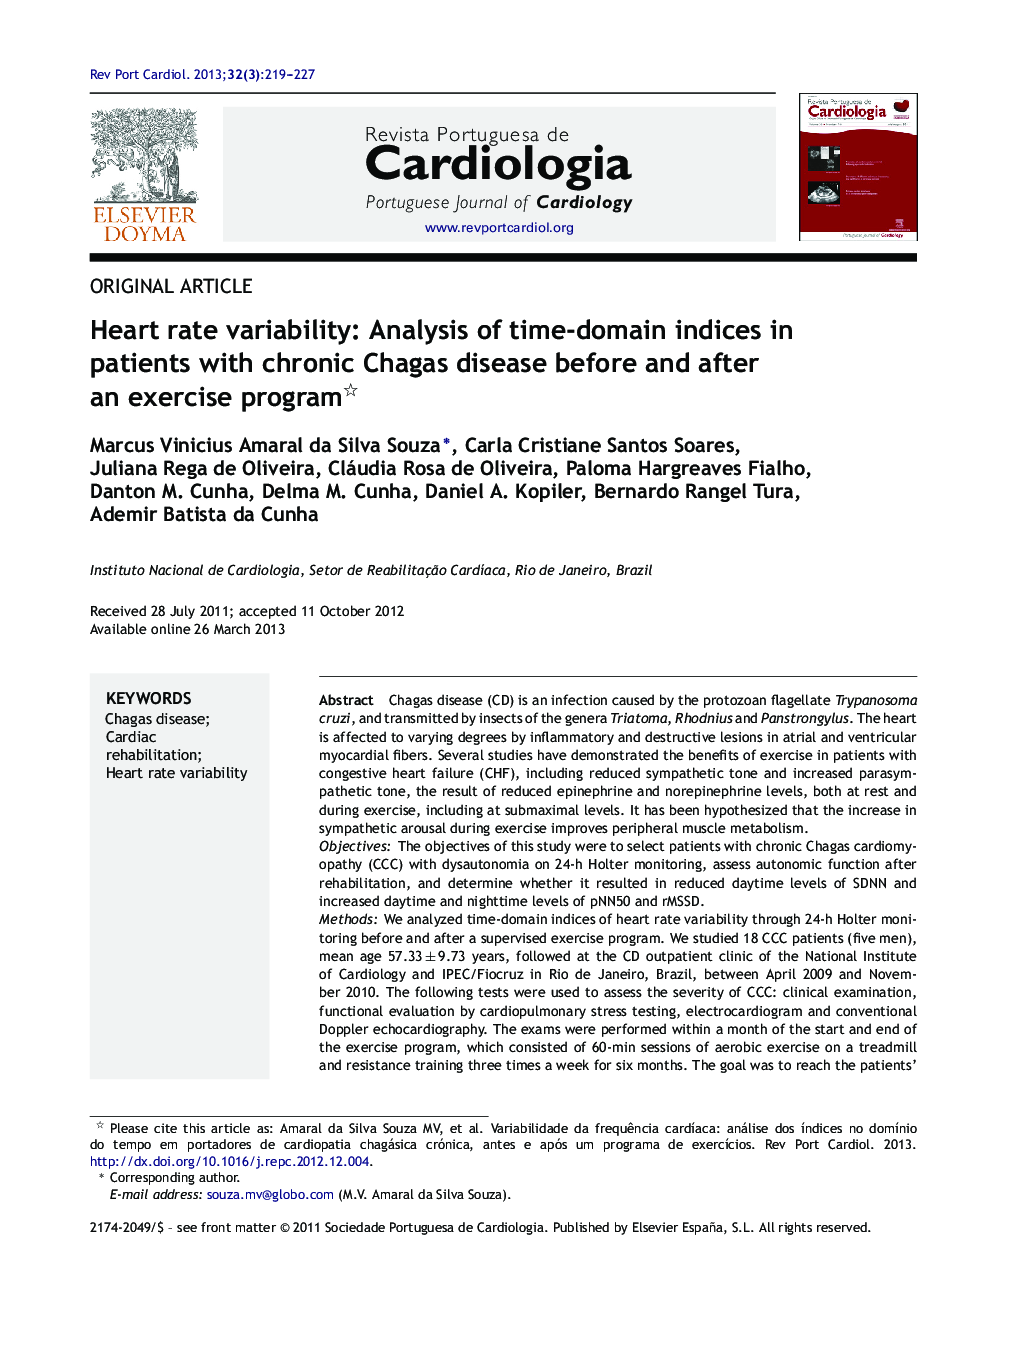 Heart rate variability: Analysis of time-domain indices in patients with chronic Chagas disease before and after an exercise program 